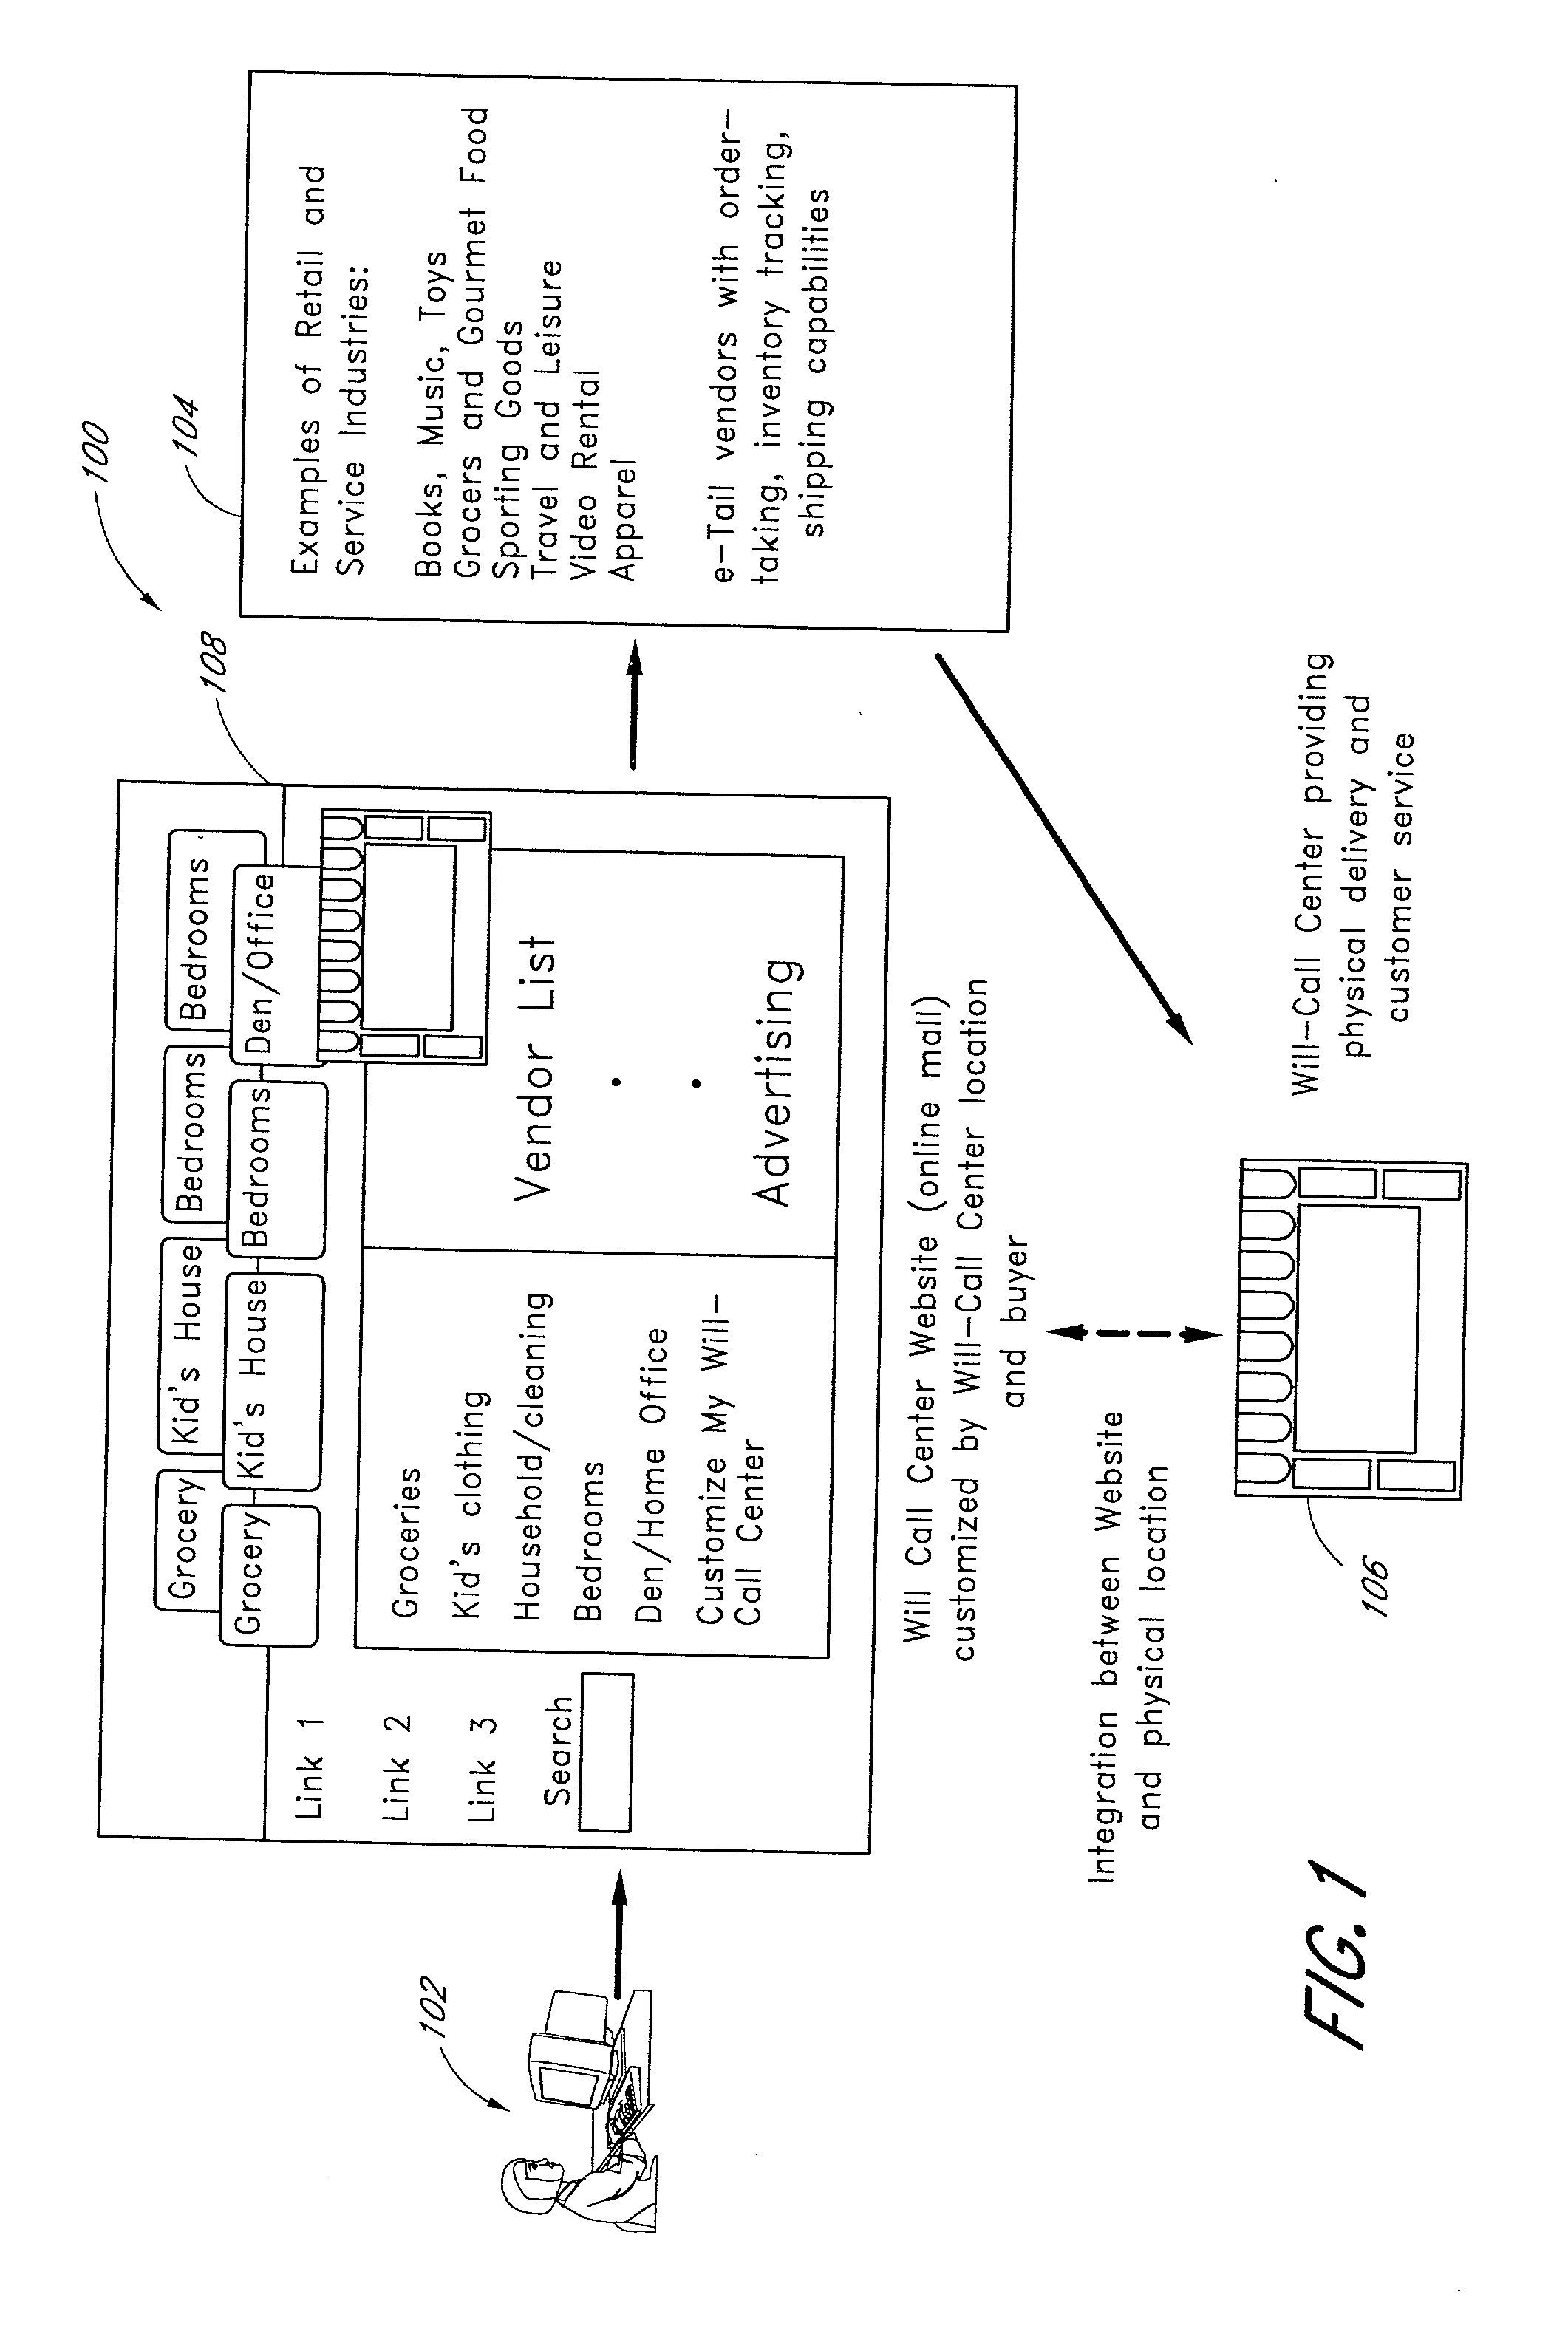 Methods and systems for the physical delivery of goods ordered through an electronic network